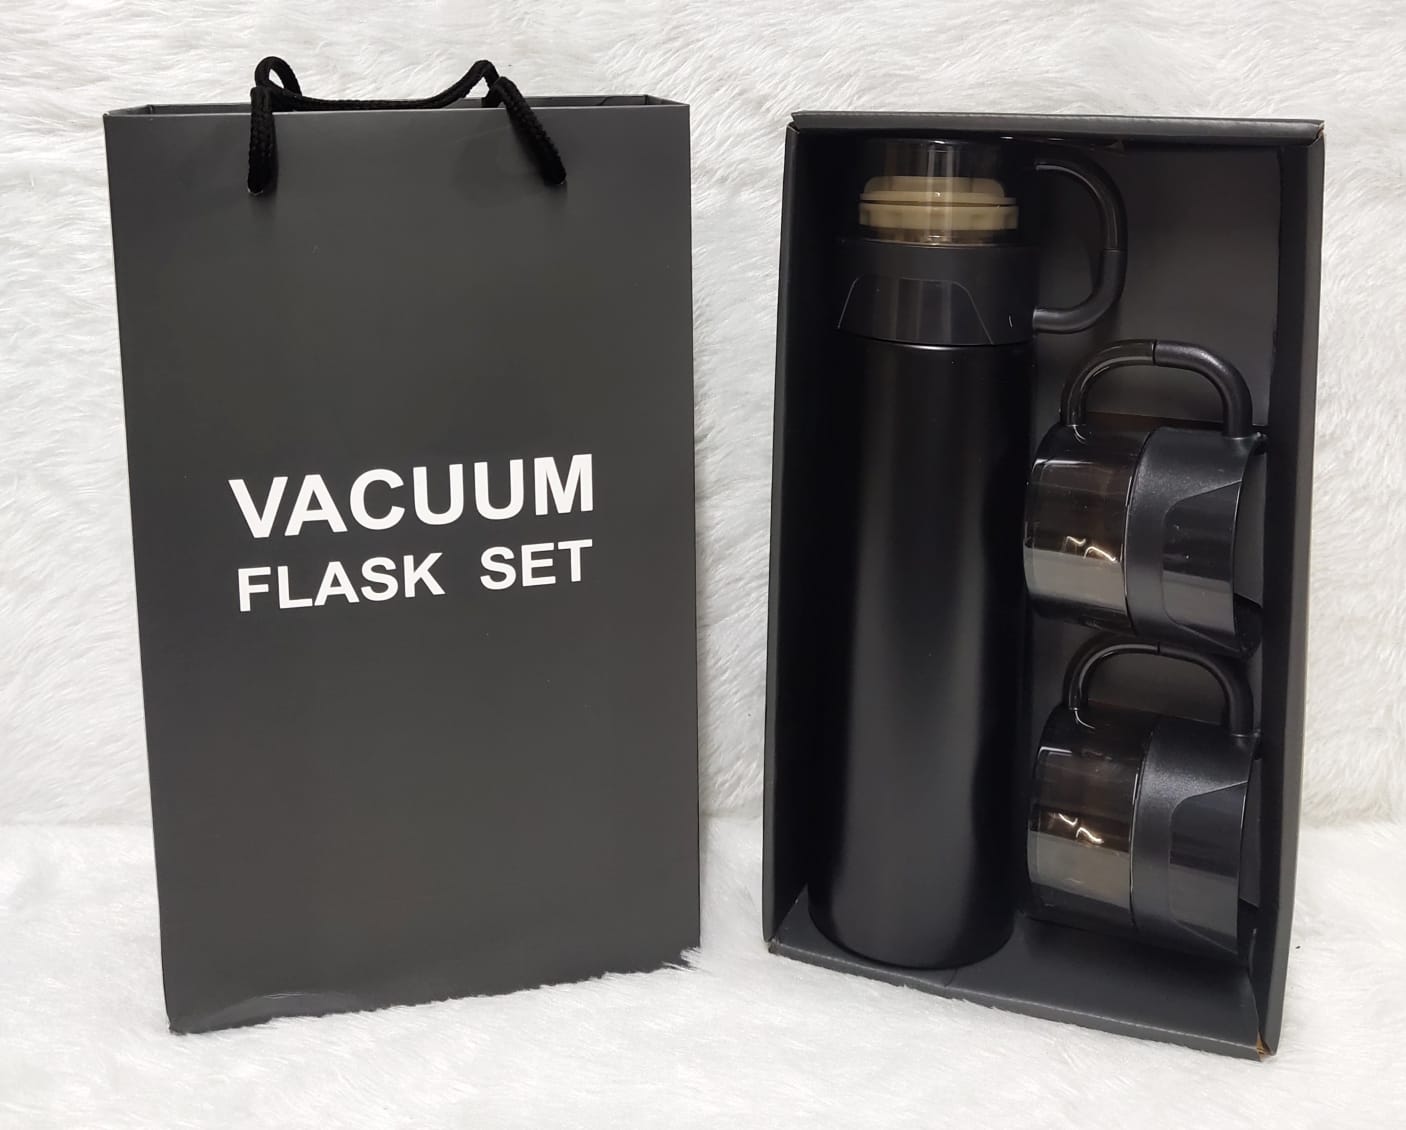 Steel Insulated Vacuum Flask Set with 3 Steel Cups Combo - Assorted Mix Colors - For Return Gift, Corporate Gifting, Office or Personal Use